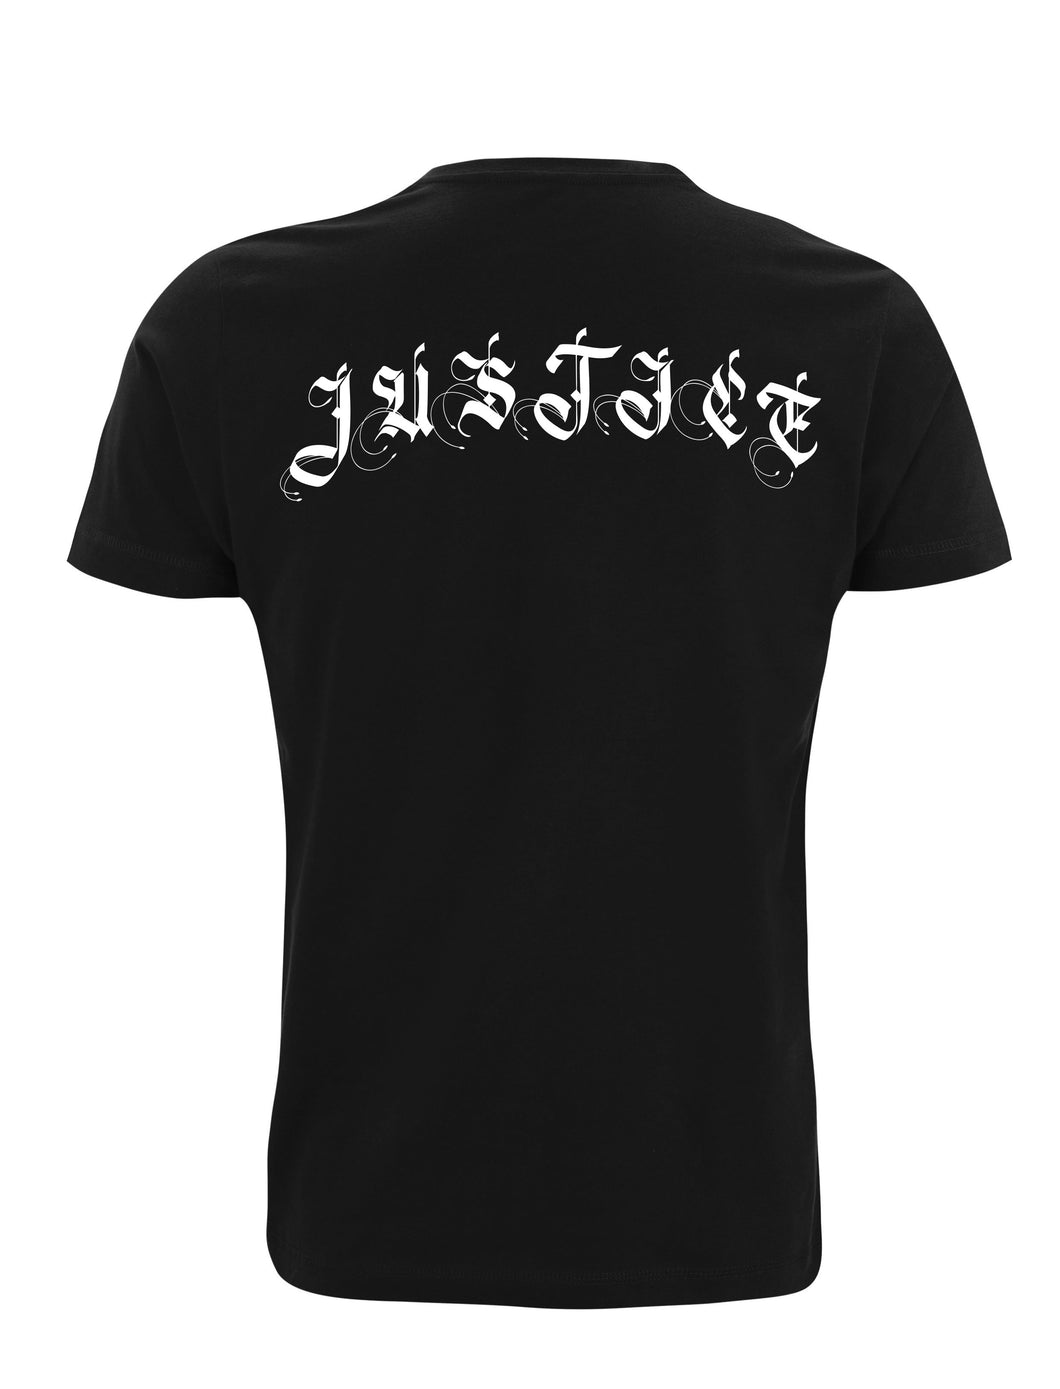 JUSTICE T-SHIRT